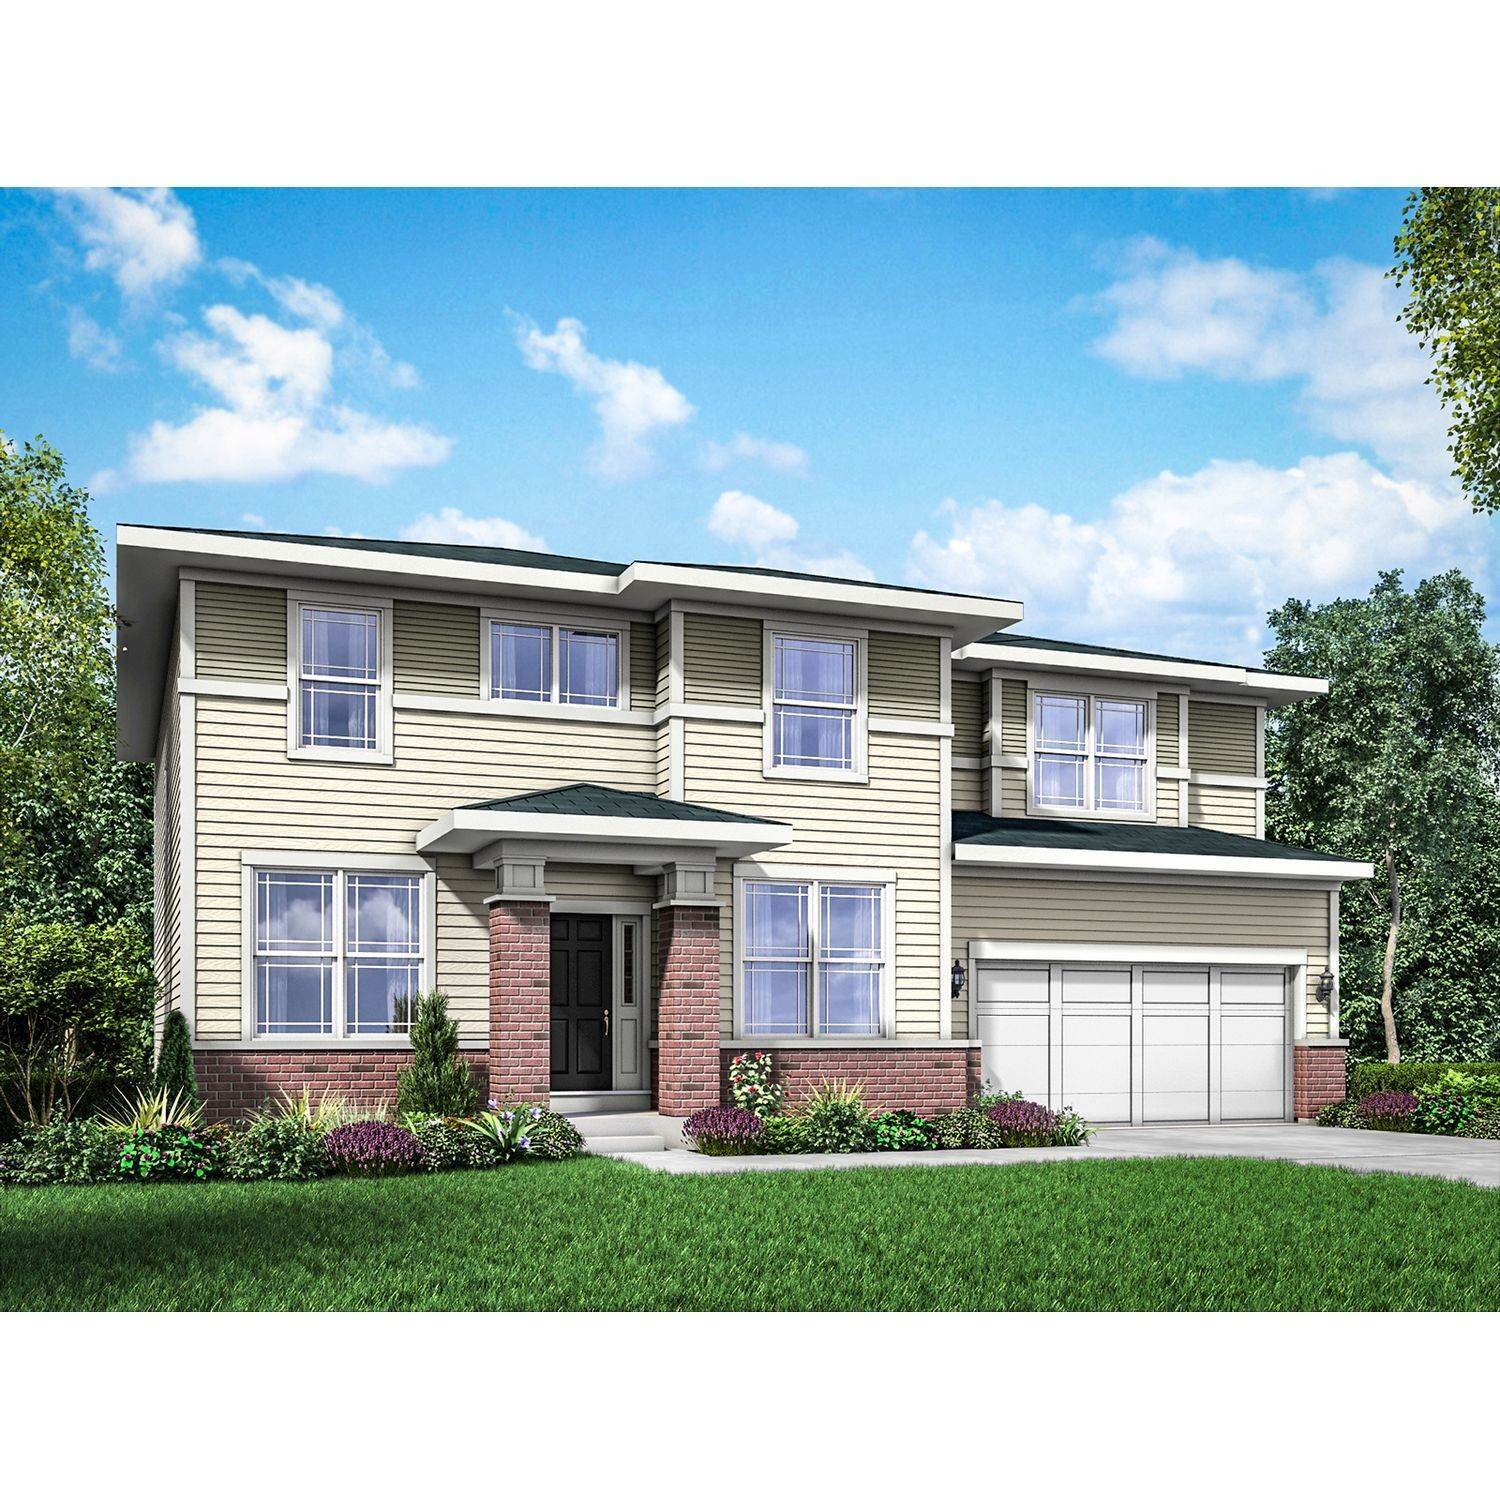 30. Single Family for Sale at Sun Prairie, WI 53590